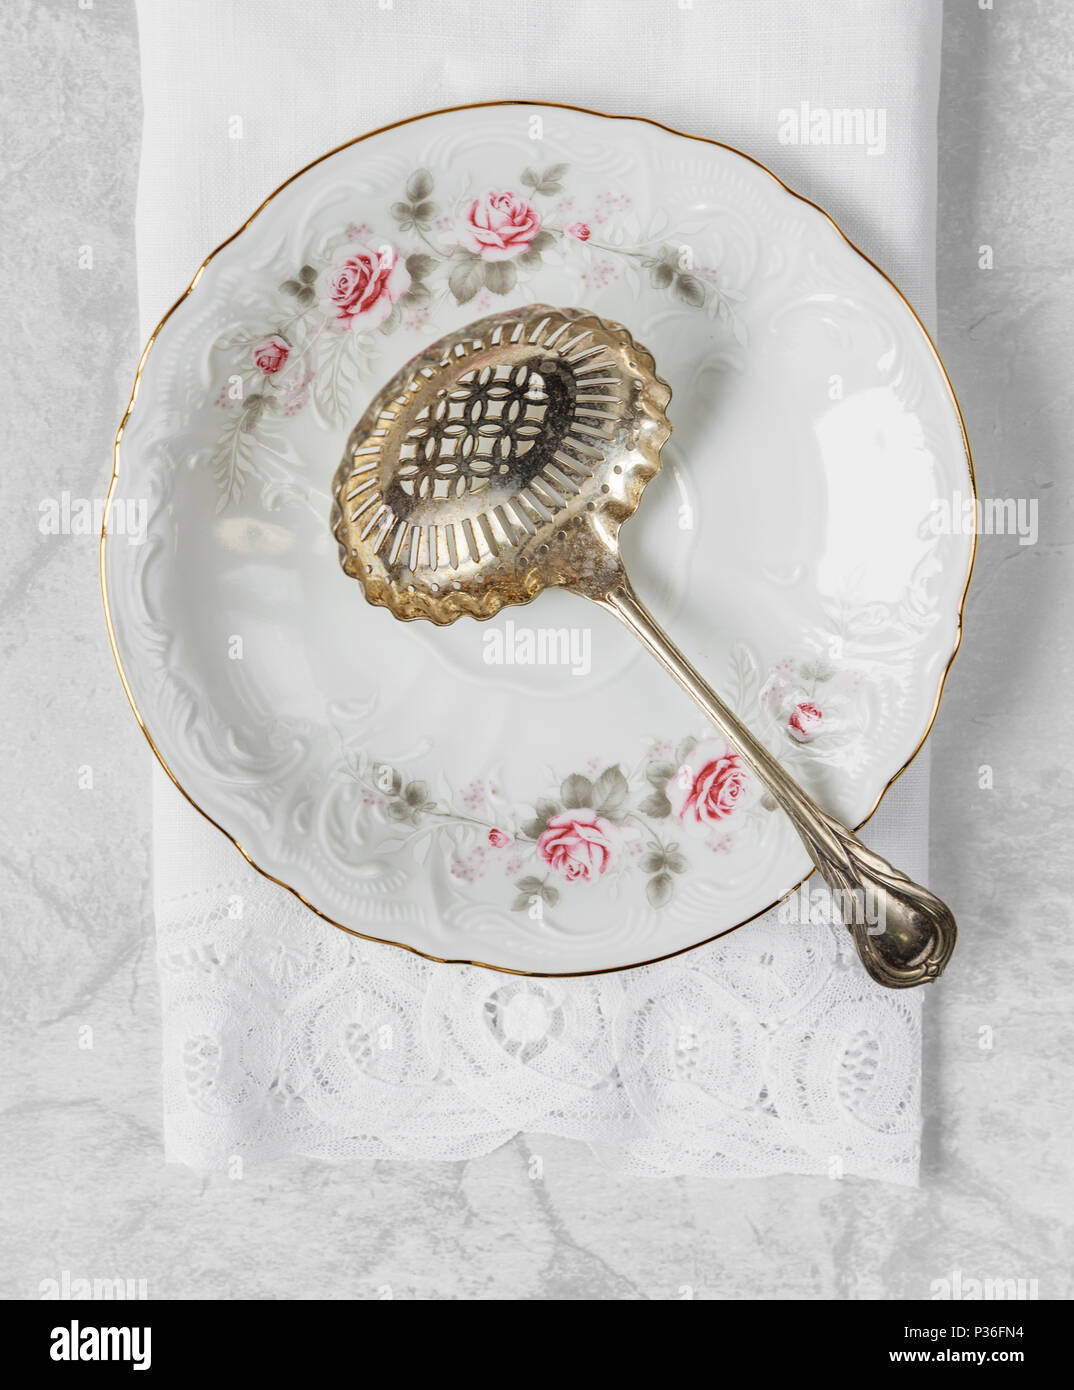 Beautiful silver spoon for compote lies on a porcelain plate with a gold rim, decorated with a pattern of roses, with a lacy linen napkin. Top view Stock Photo